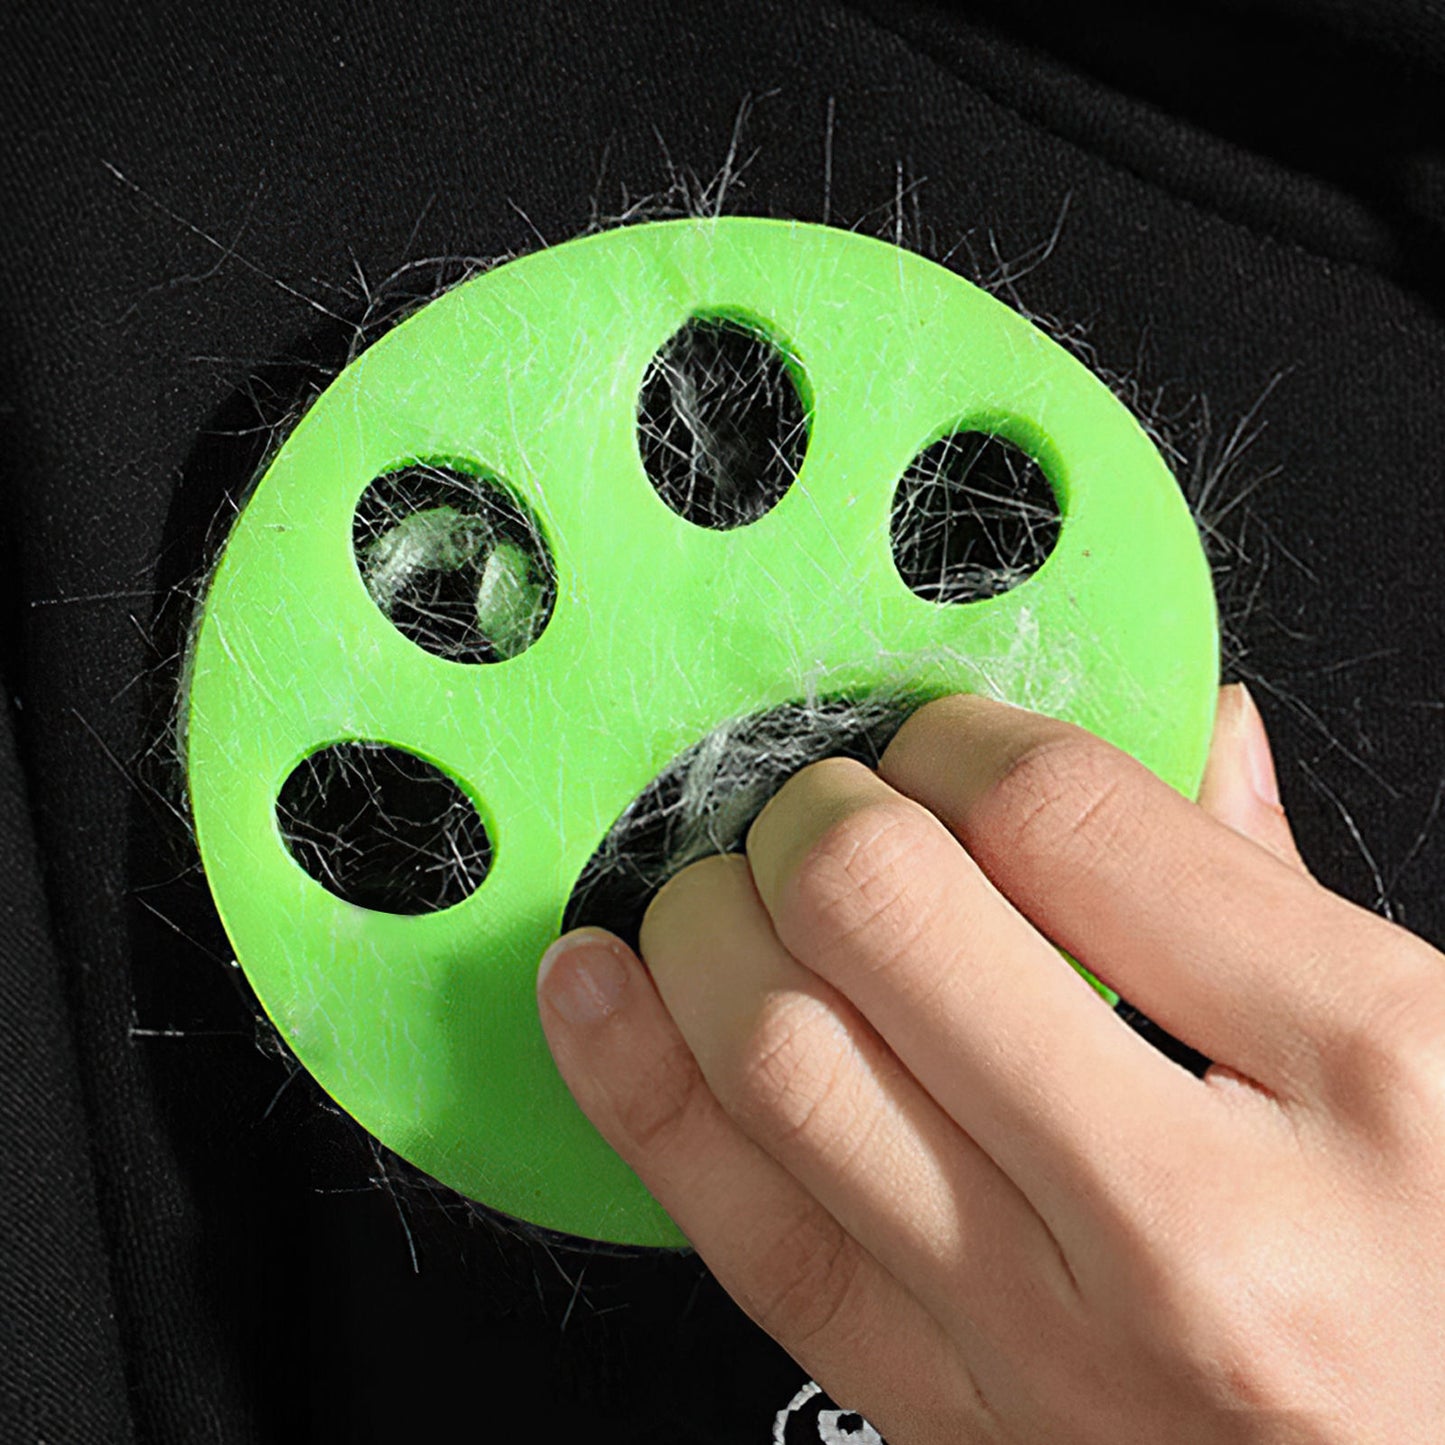 Pawfriends Soft Pet Hair Remover Clothes Cleaning Lint Catcher Solid Laundry Ball Green